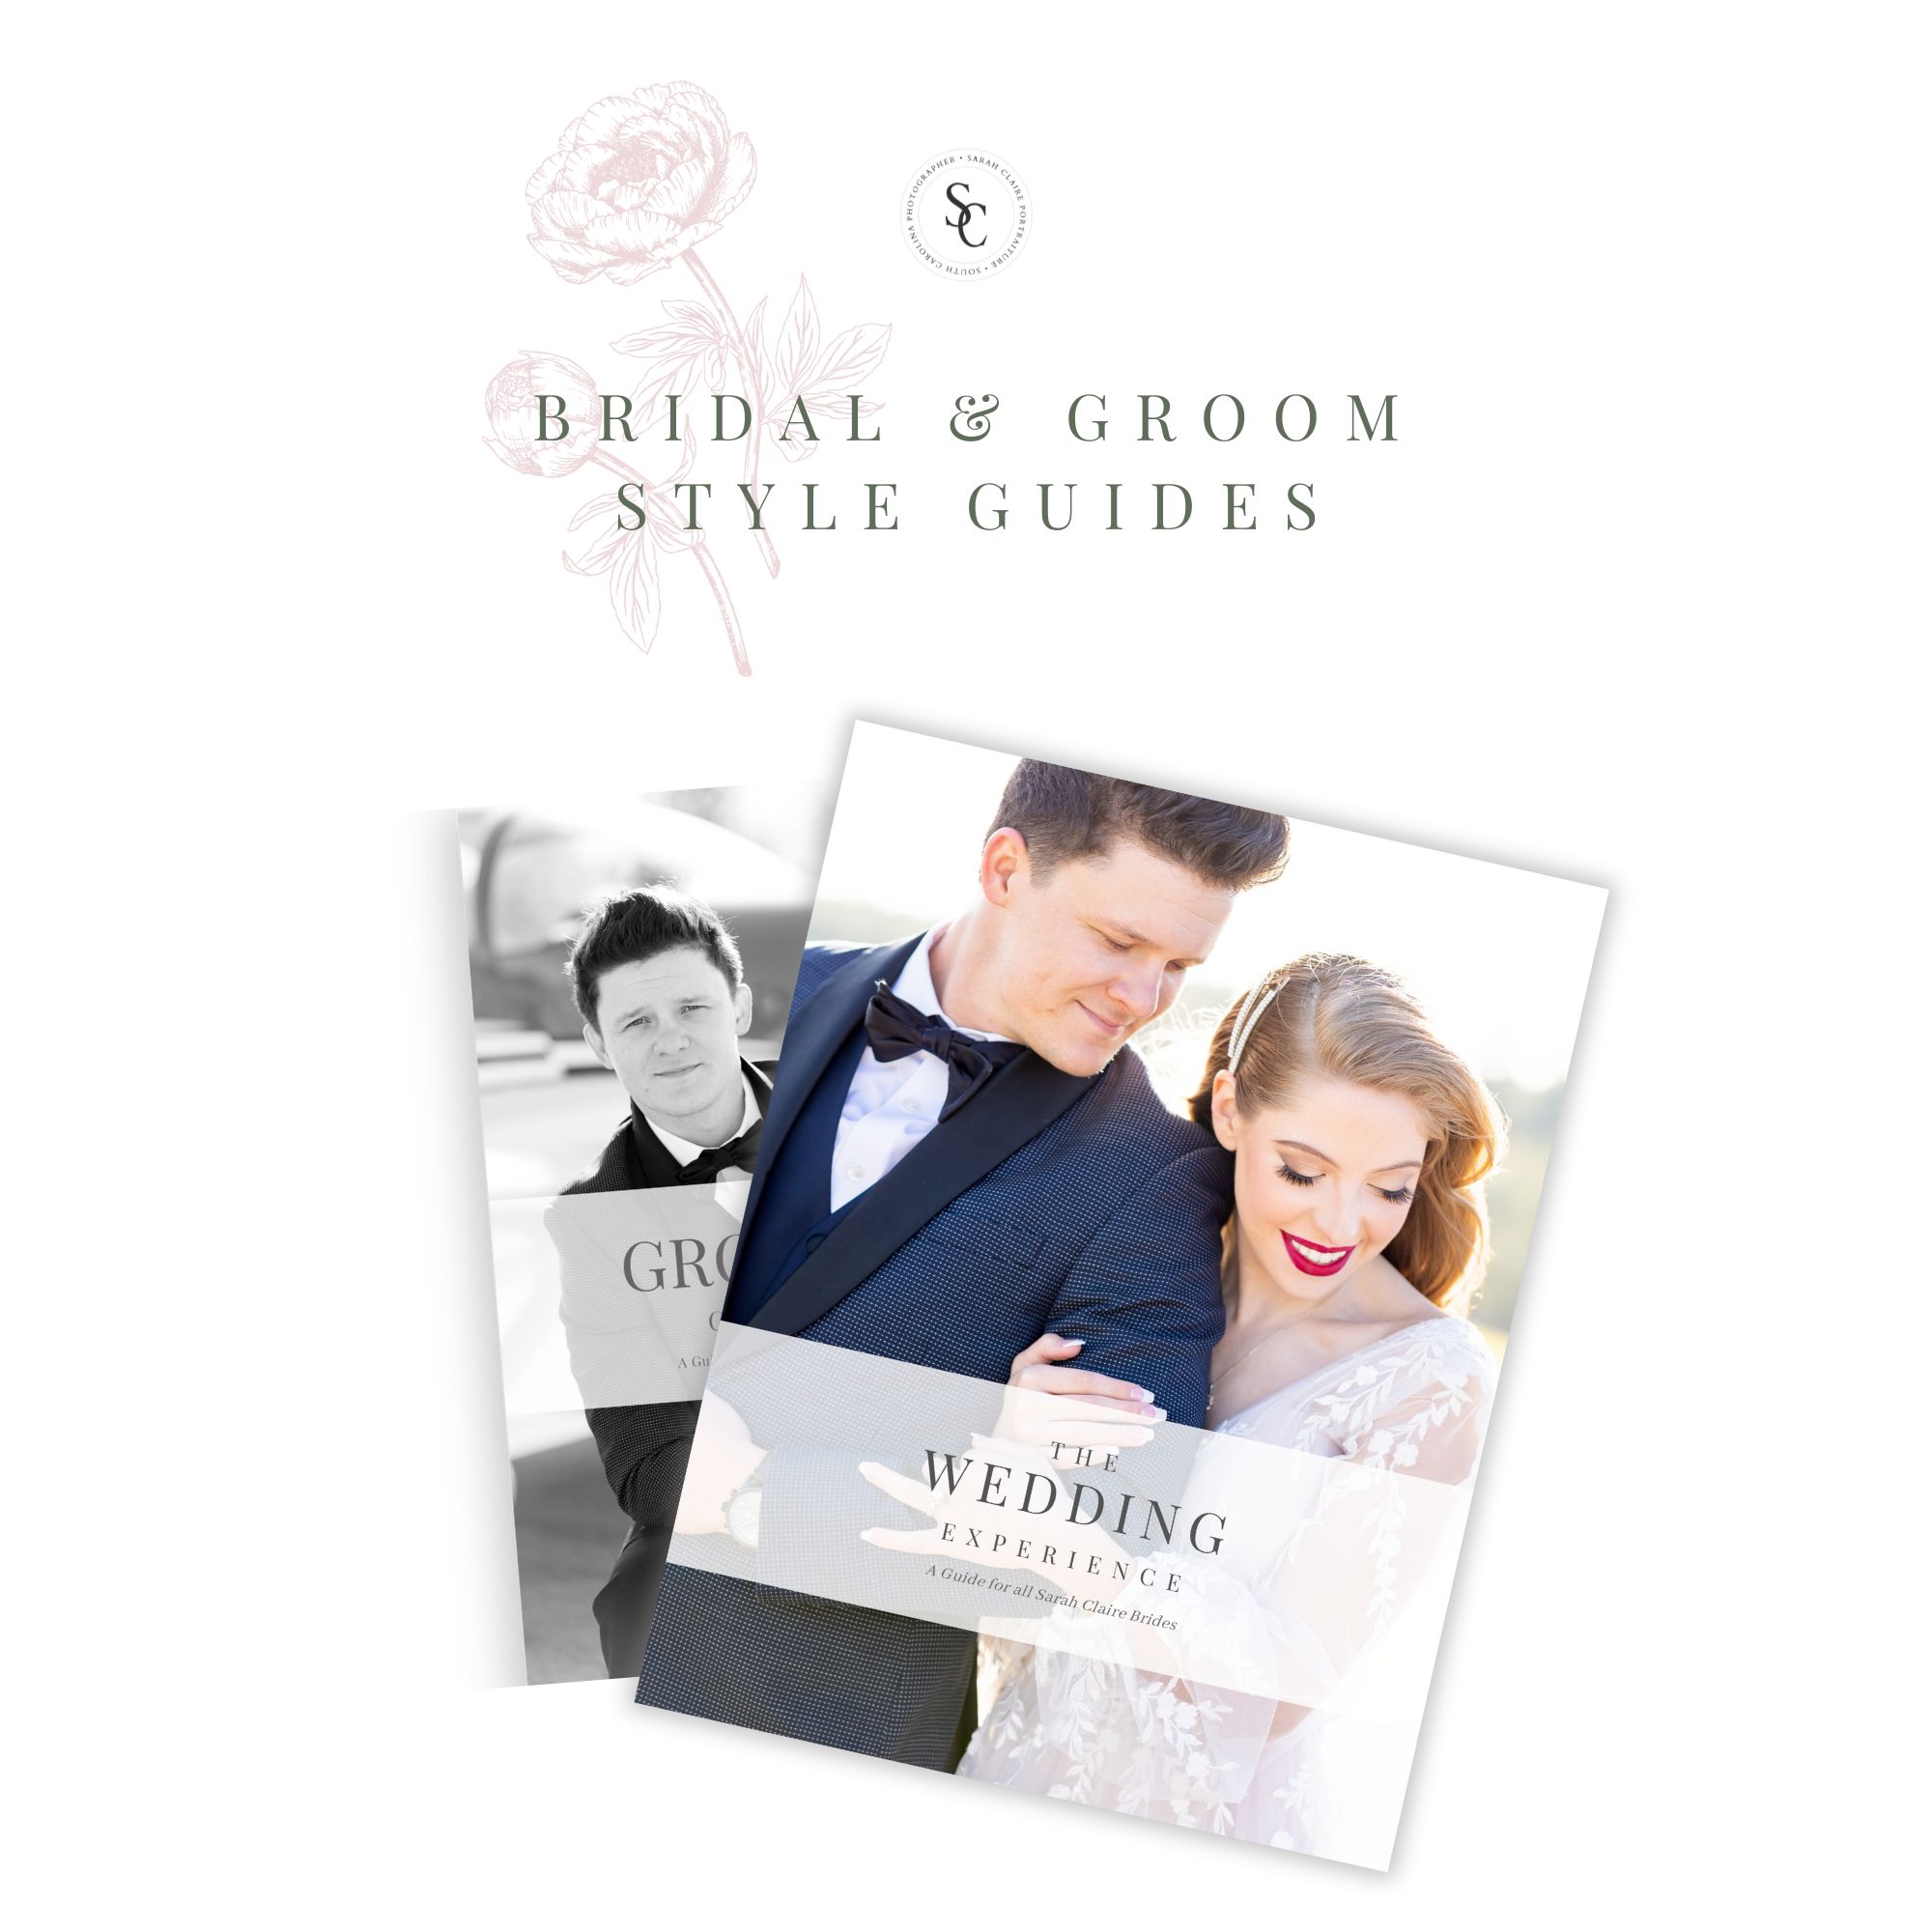 An Elevated Client Experience: The SCP Style Guides for brides and grooms